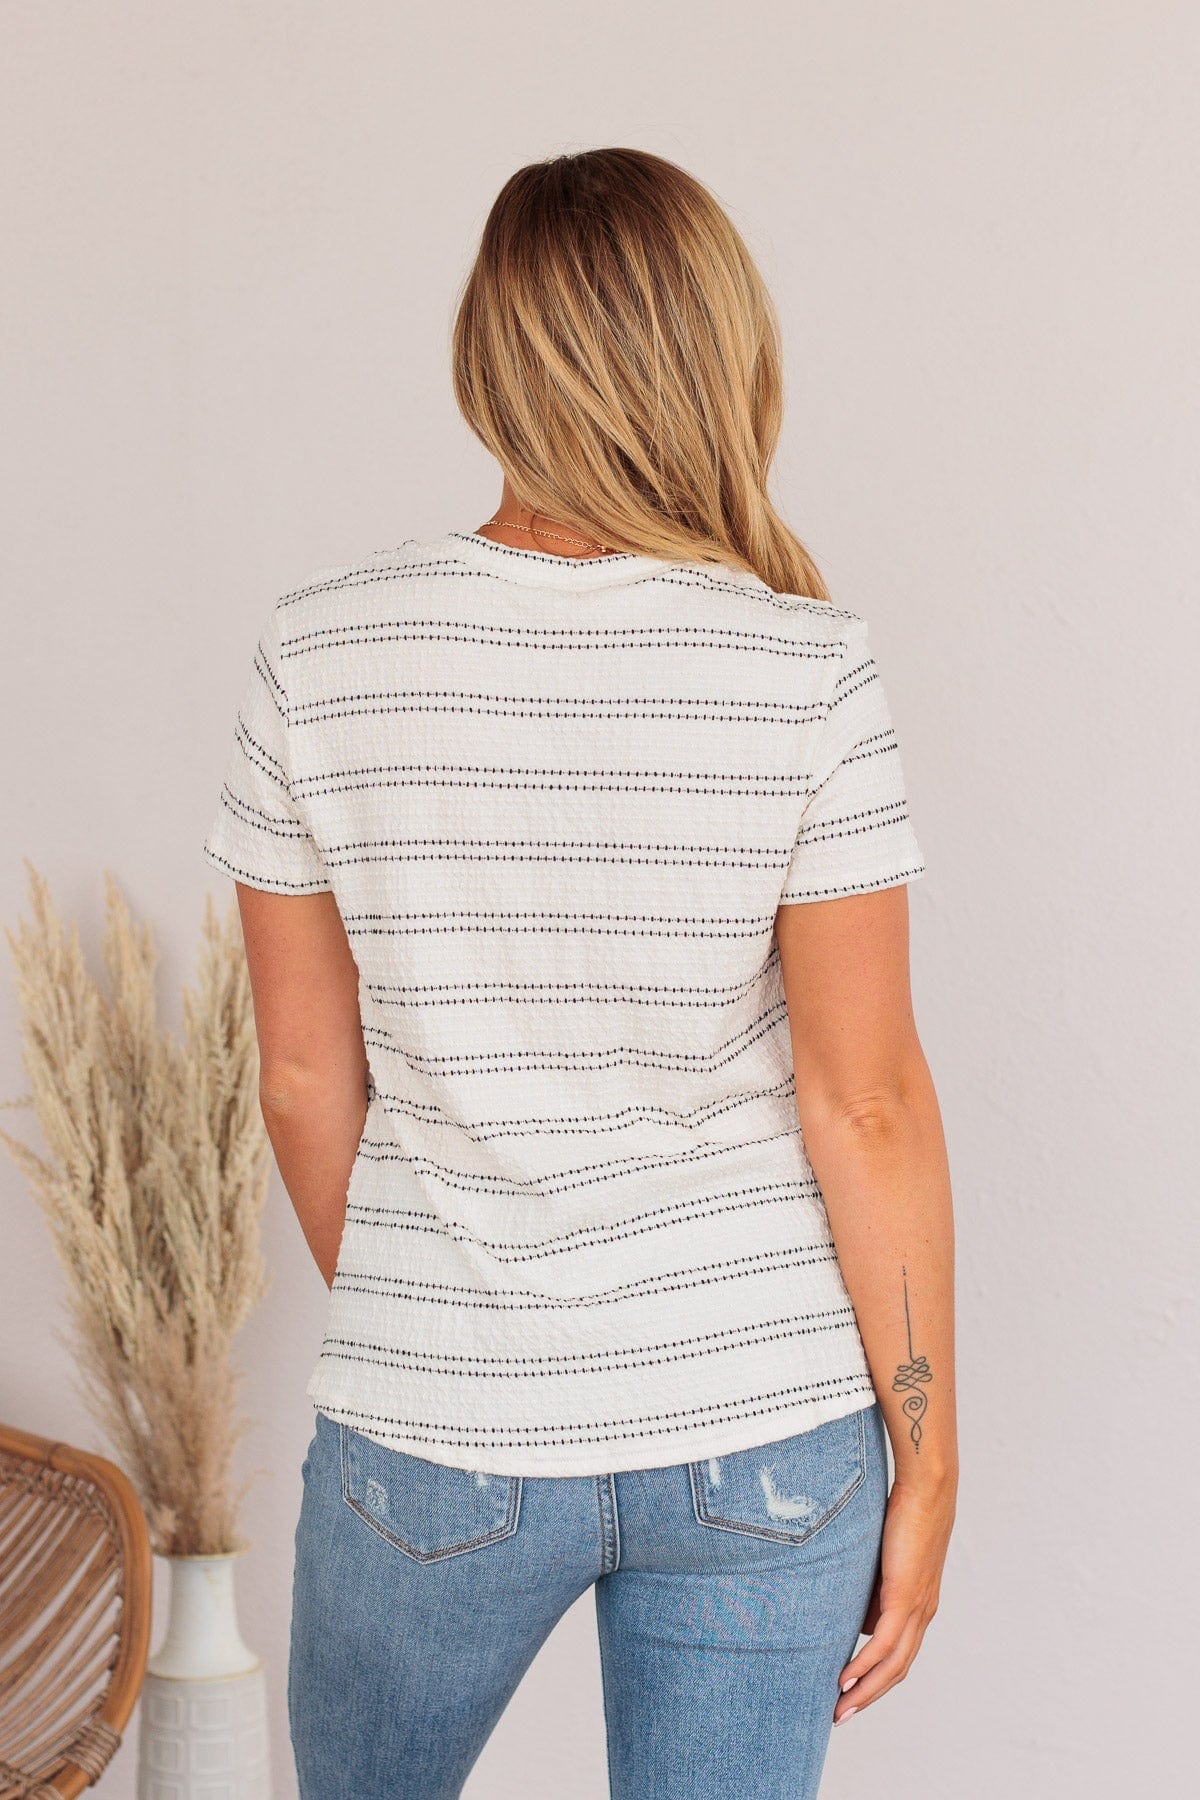 Stand Strong Together Striped Top- Ivory